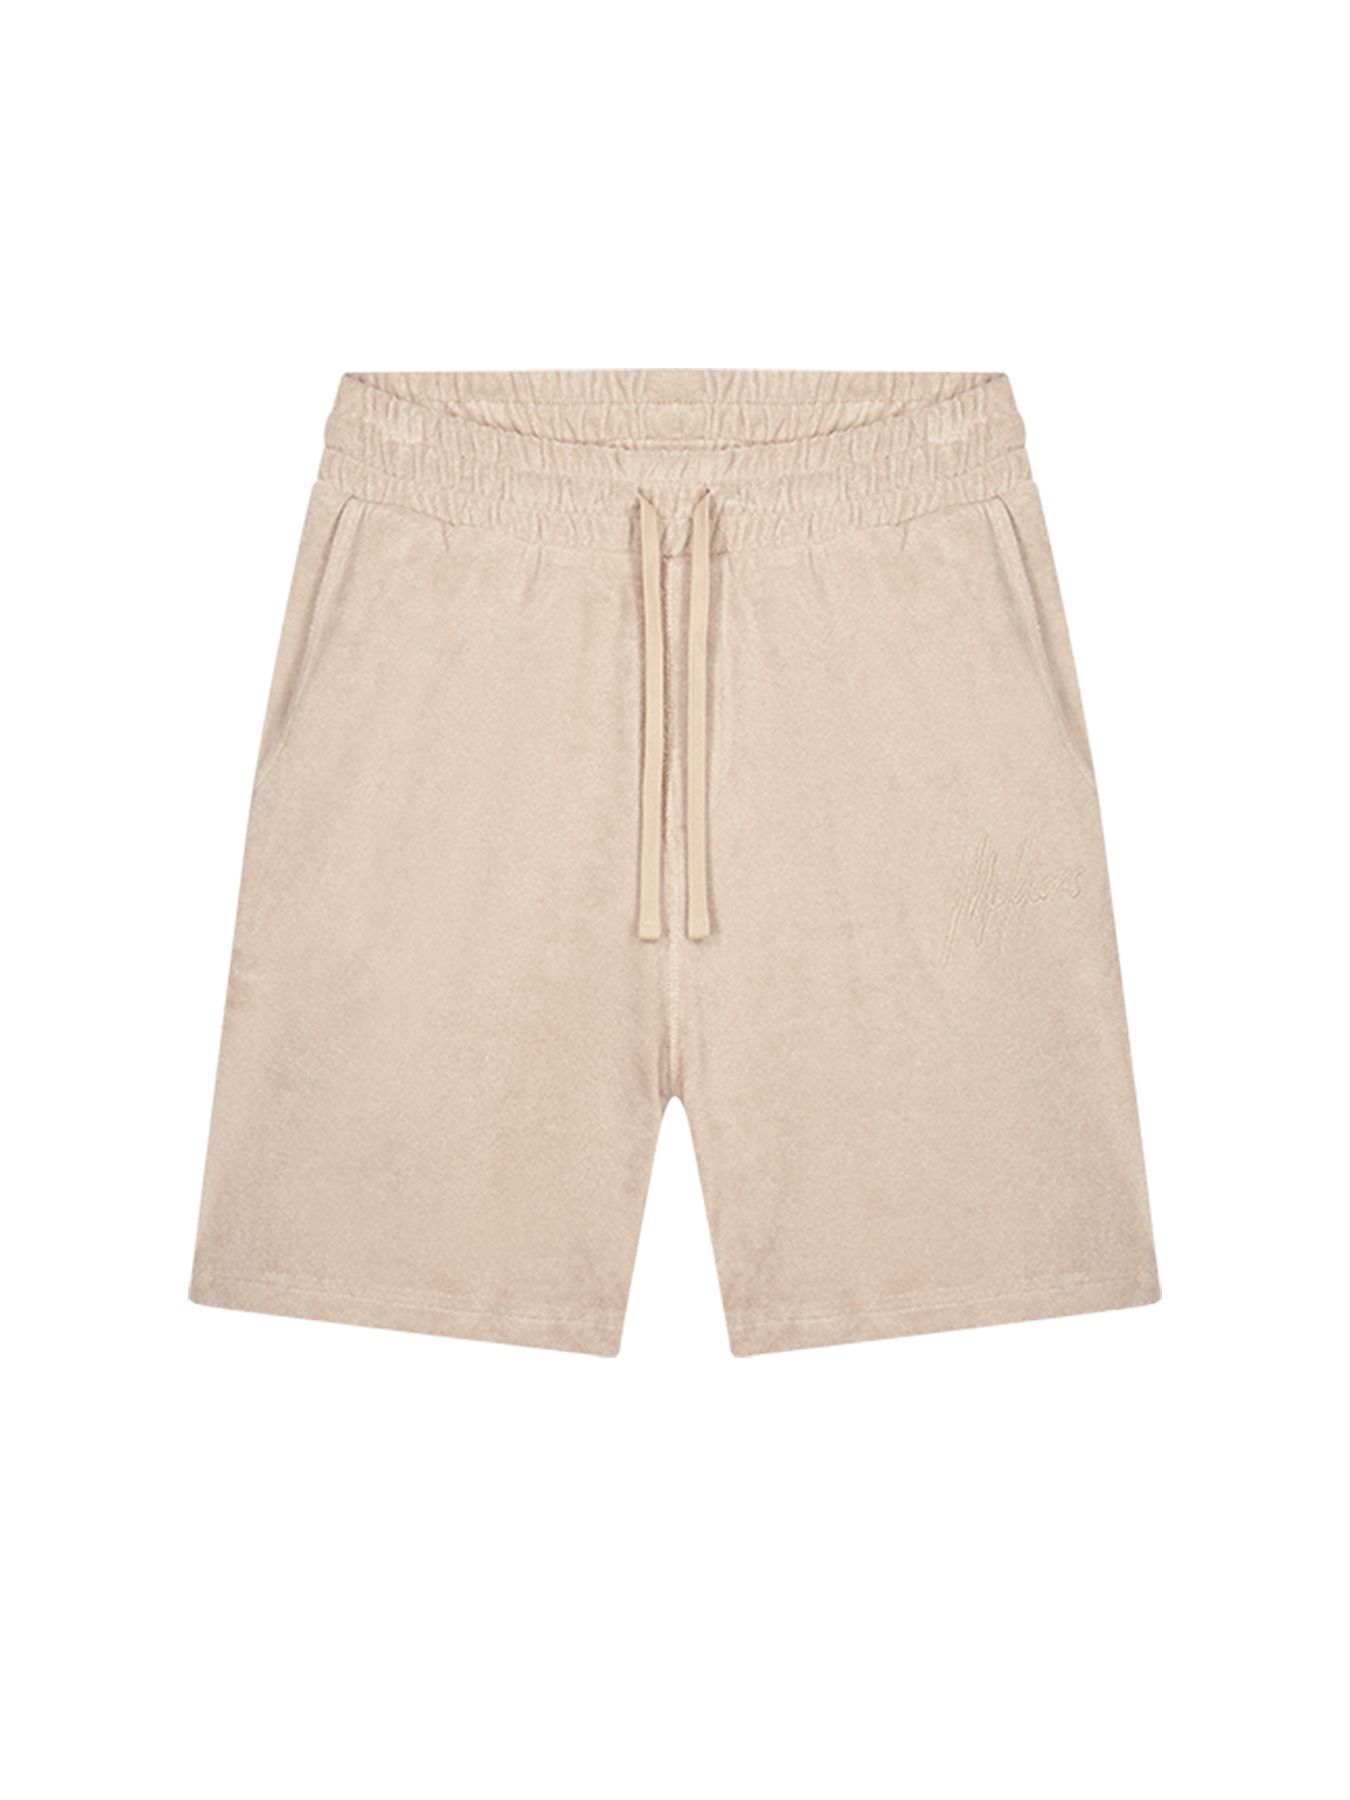 Malelions Signature toweling shorts Taupe 00107664-Z4